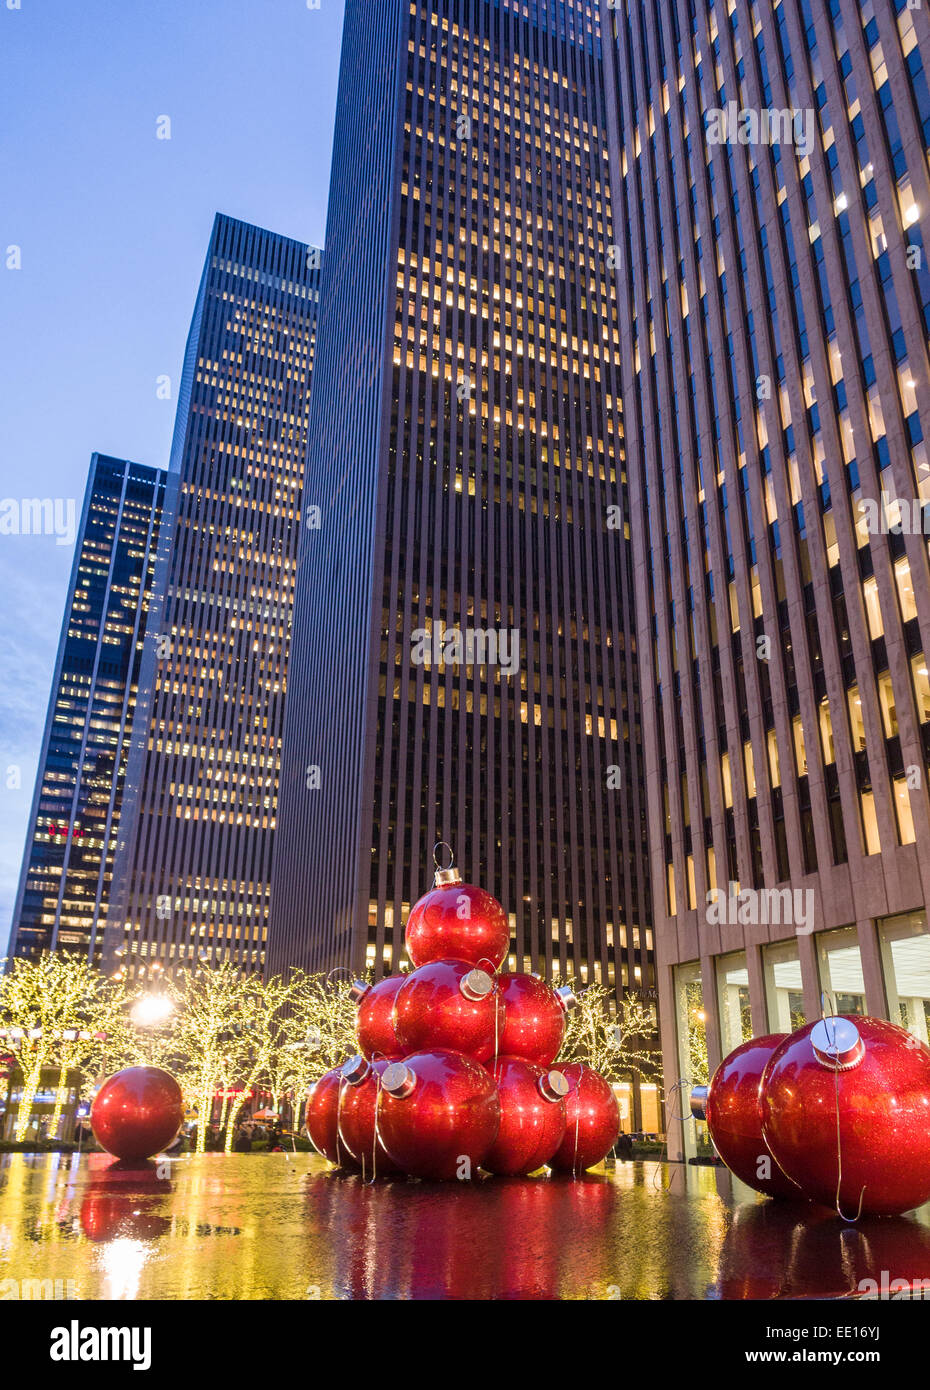 Red Giant Christmas Balls  below the towers. Evening view of huge Christmas balls placed annually in the reflecting pool and fou Stock Photo